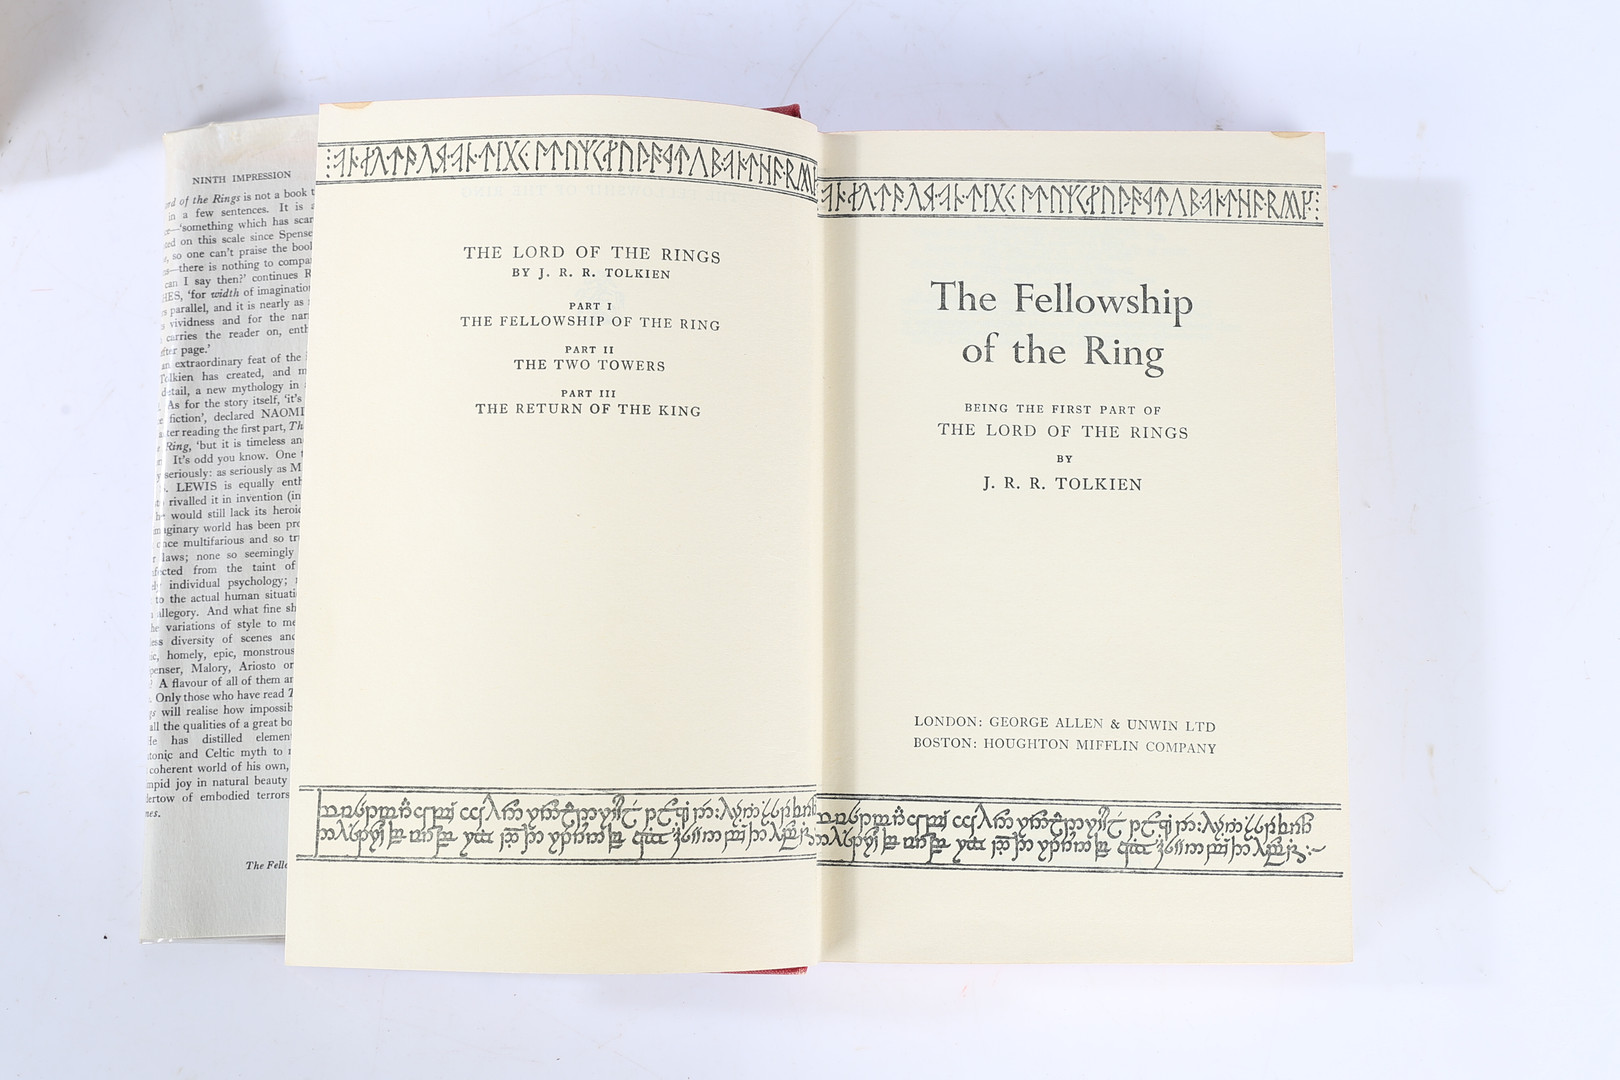 J.R.R TOLKIEN "THE LORD OF THE RINGS" VOLUMES 1 - 3. - Image 3 of 17